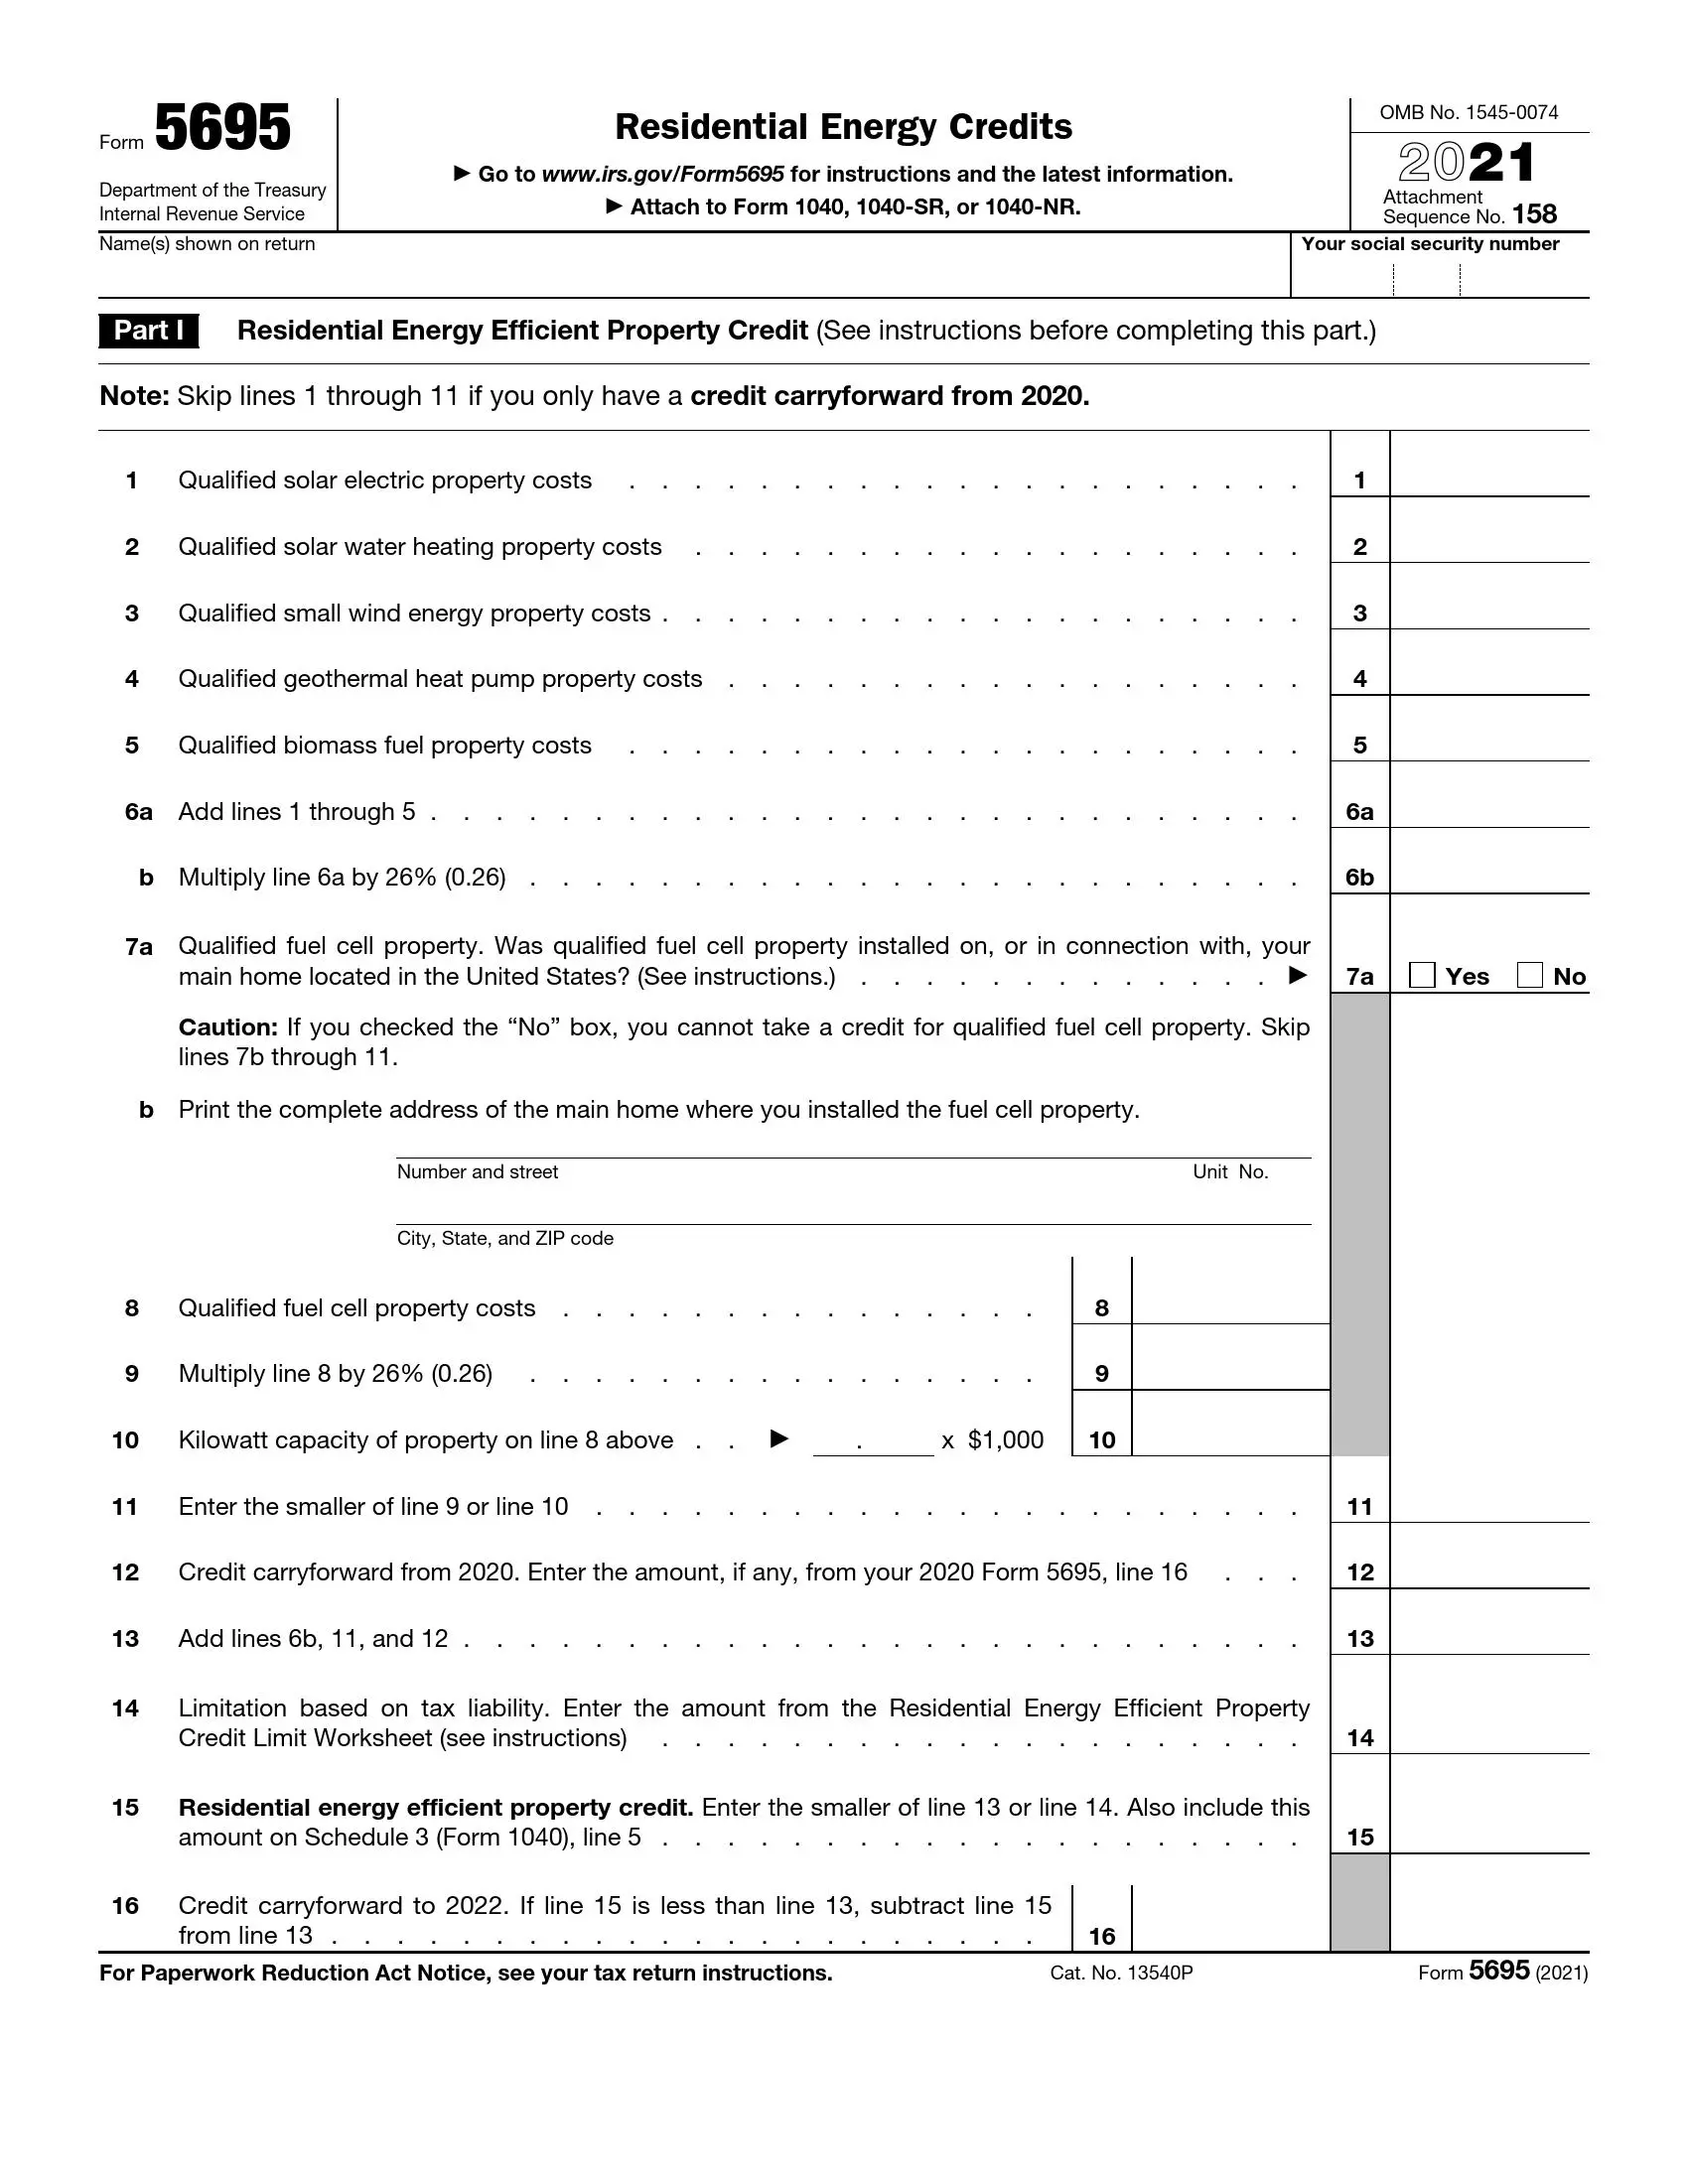 irs form 5695 2021 preview